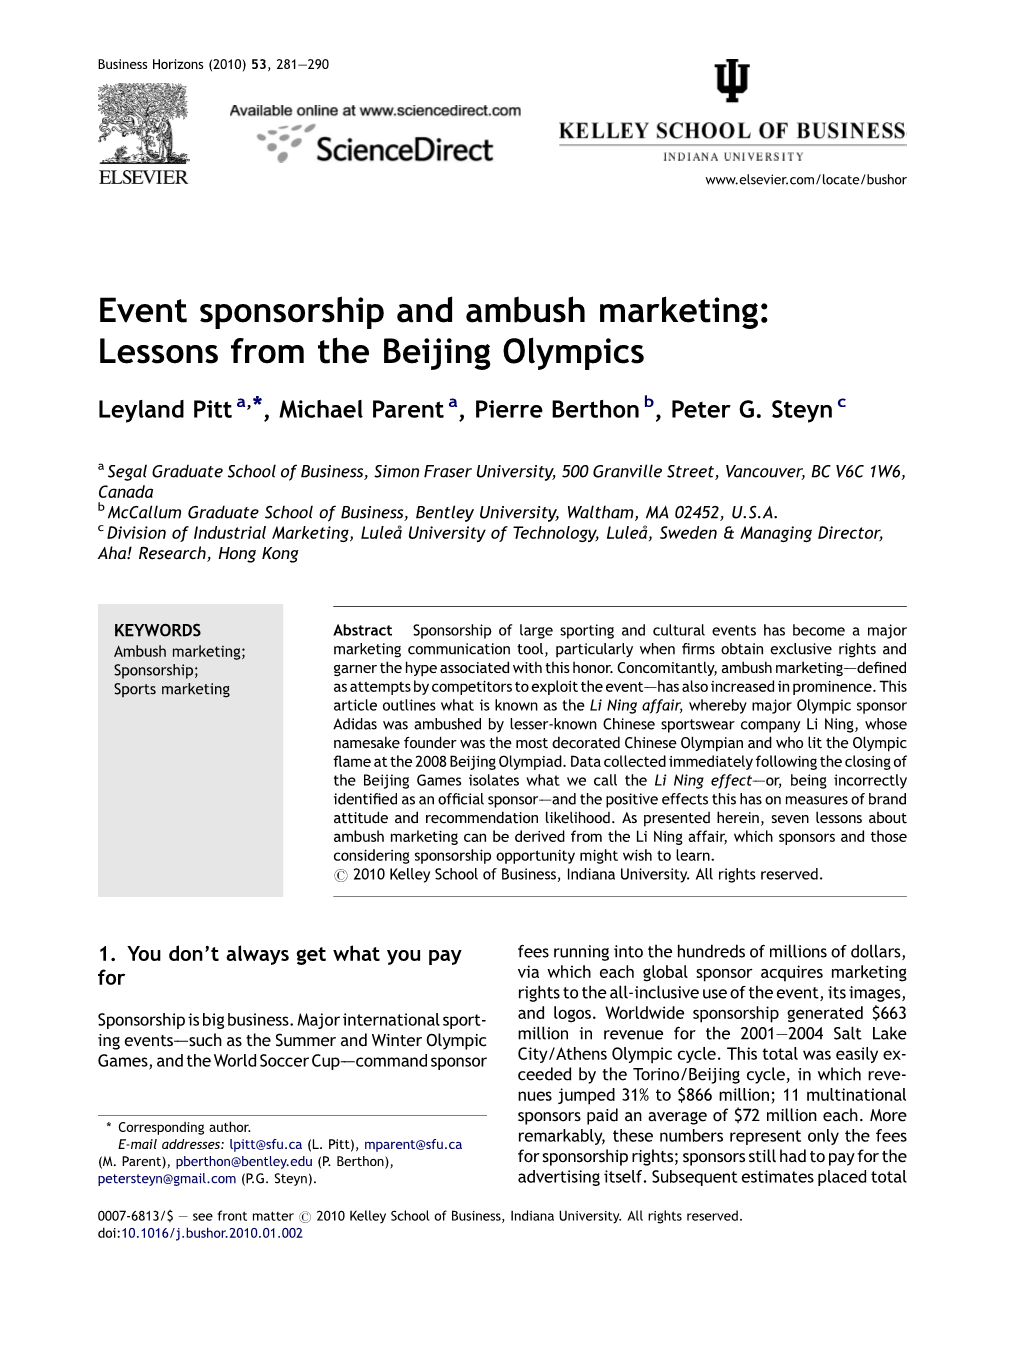 Event Sponsorship and Ambush Marketing: Lessons from the Beijing Olympics